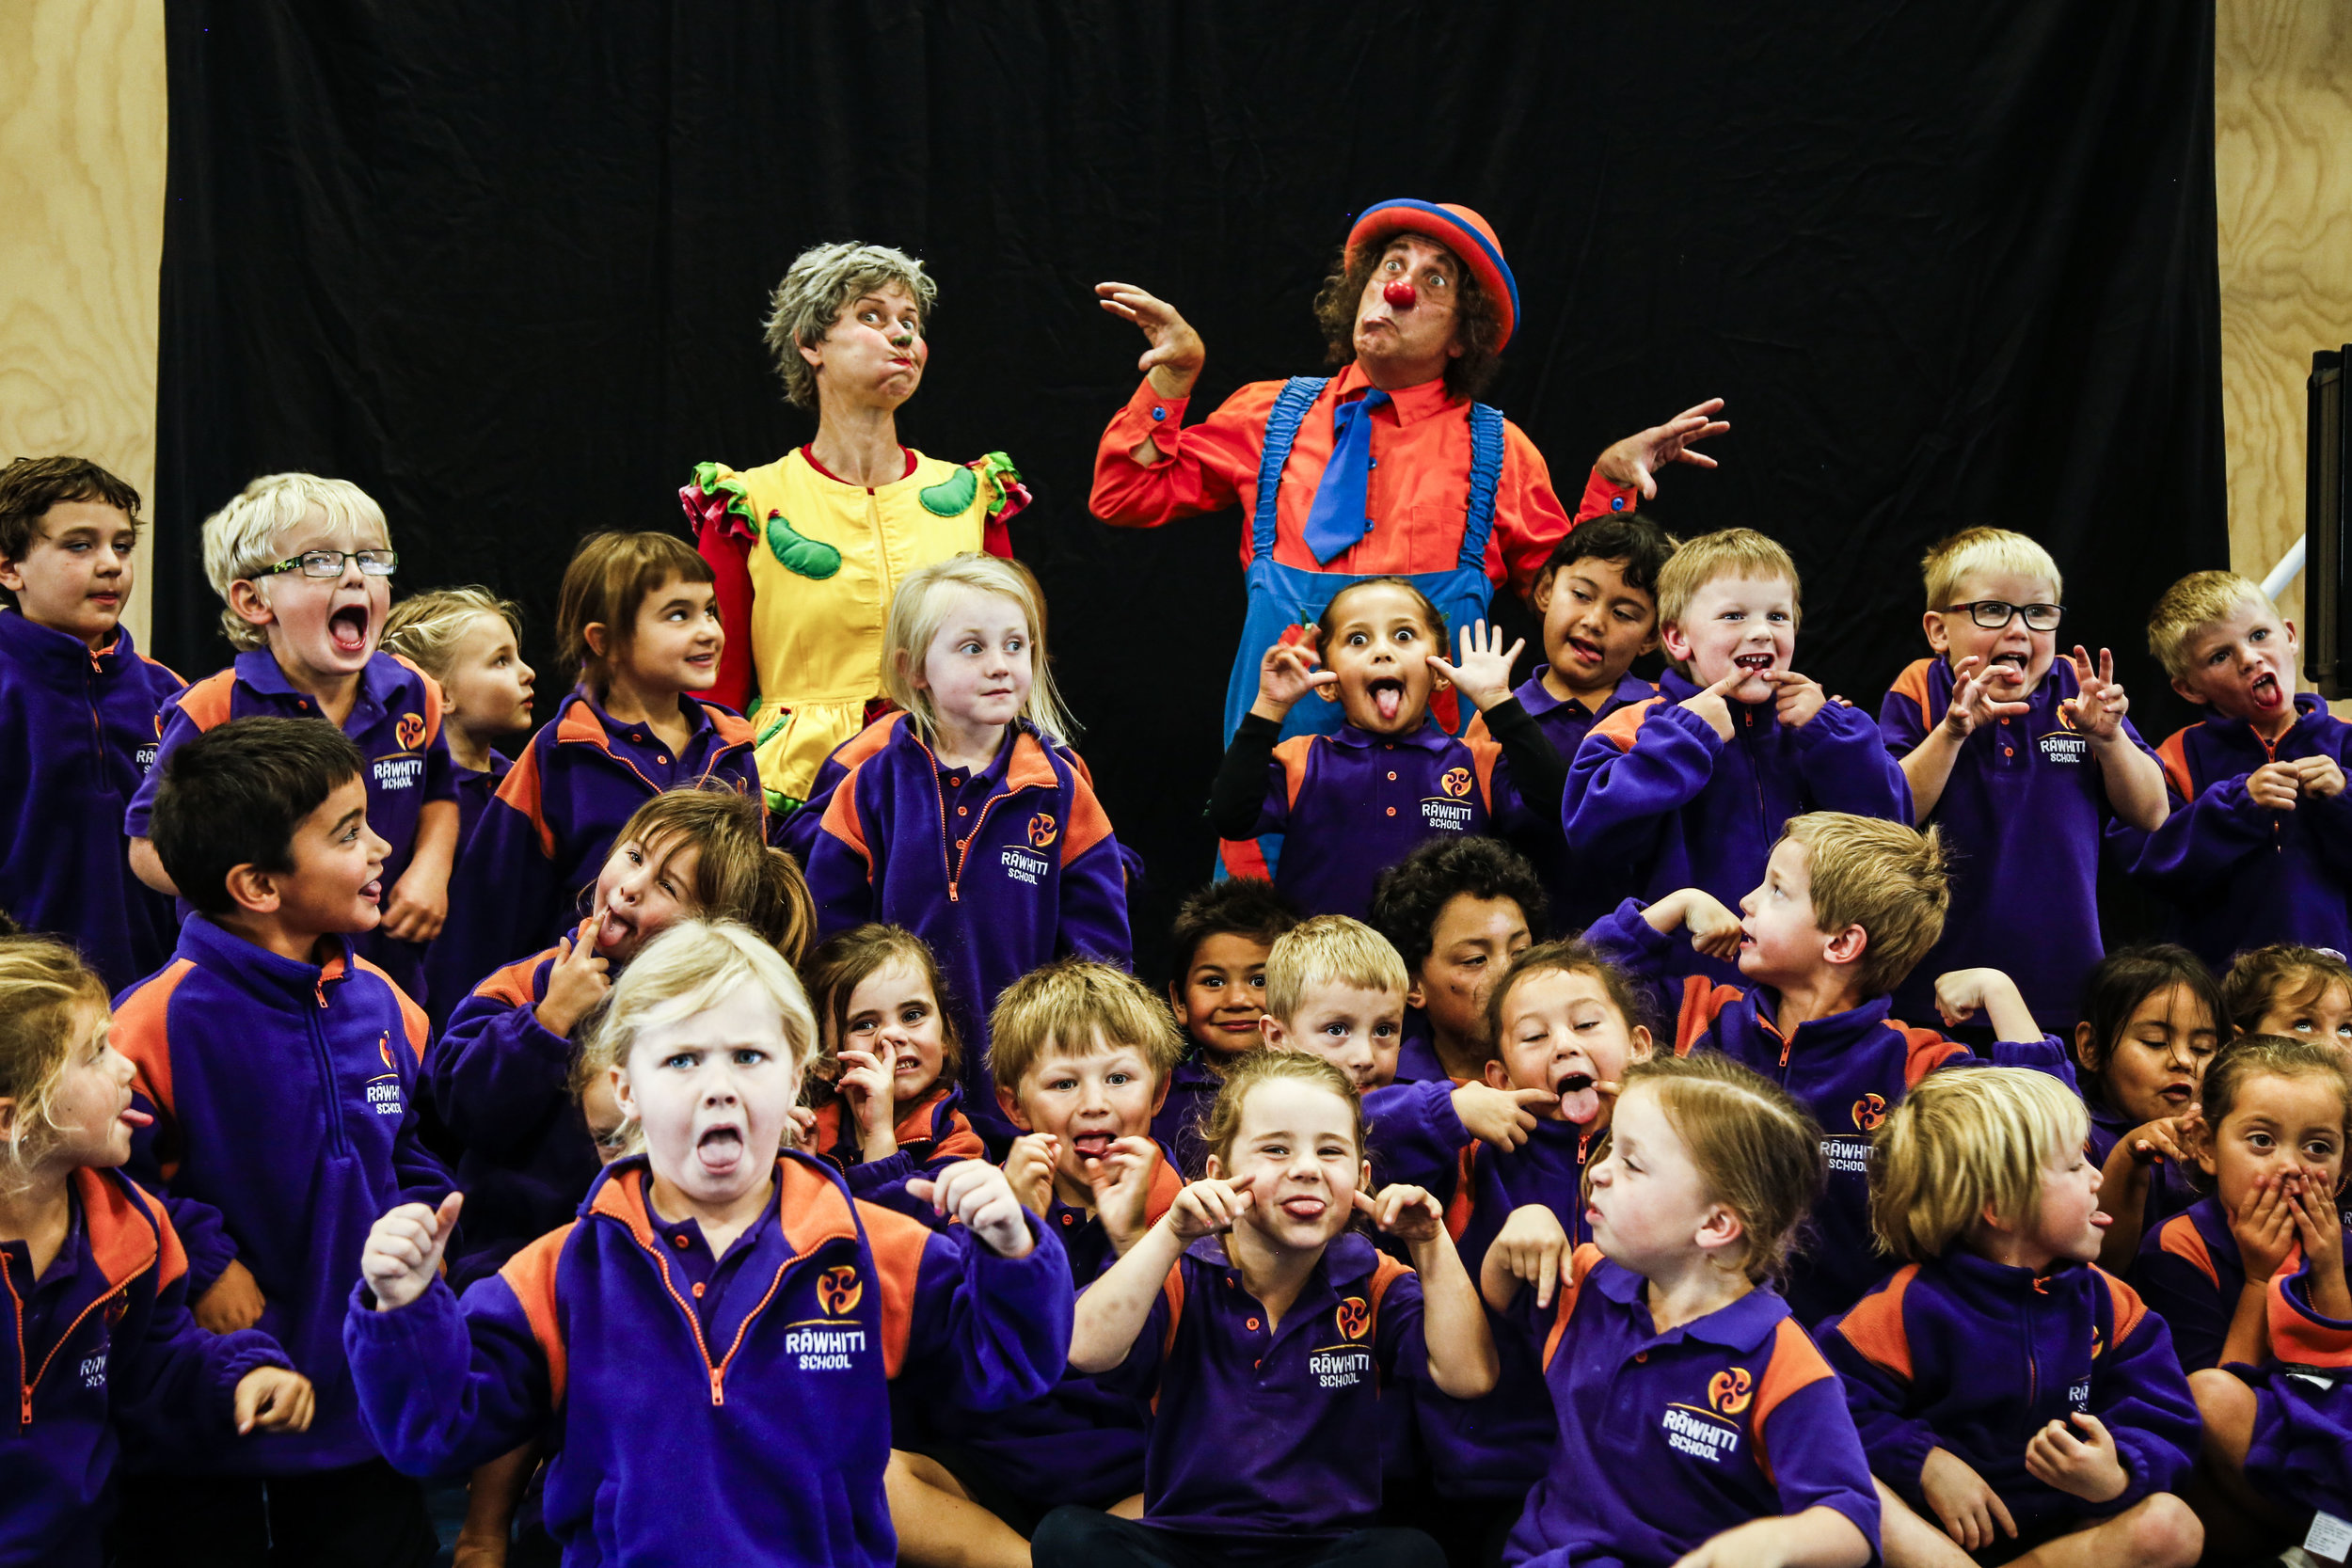  Wingfield (left) and Carrow (right) pose for pictures with the students after their performance on May 6, 2016 at Rawhiti School in Christchurch, NZ. "I love seeing the joy in children when we perform," says Wingfield. 